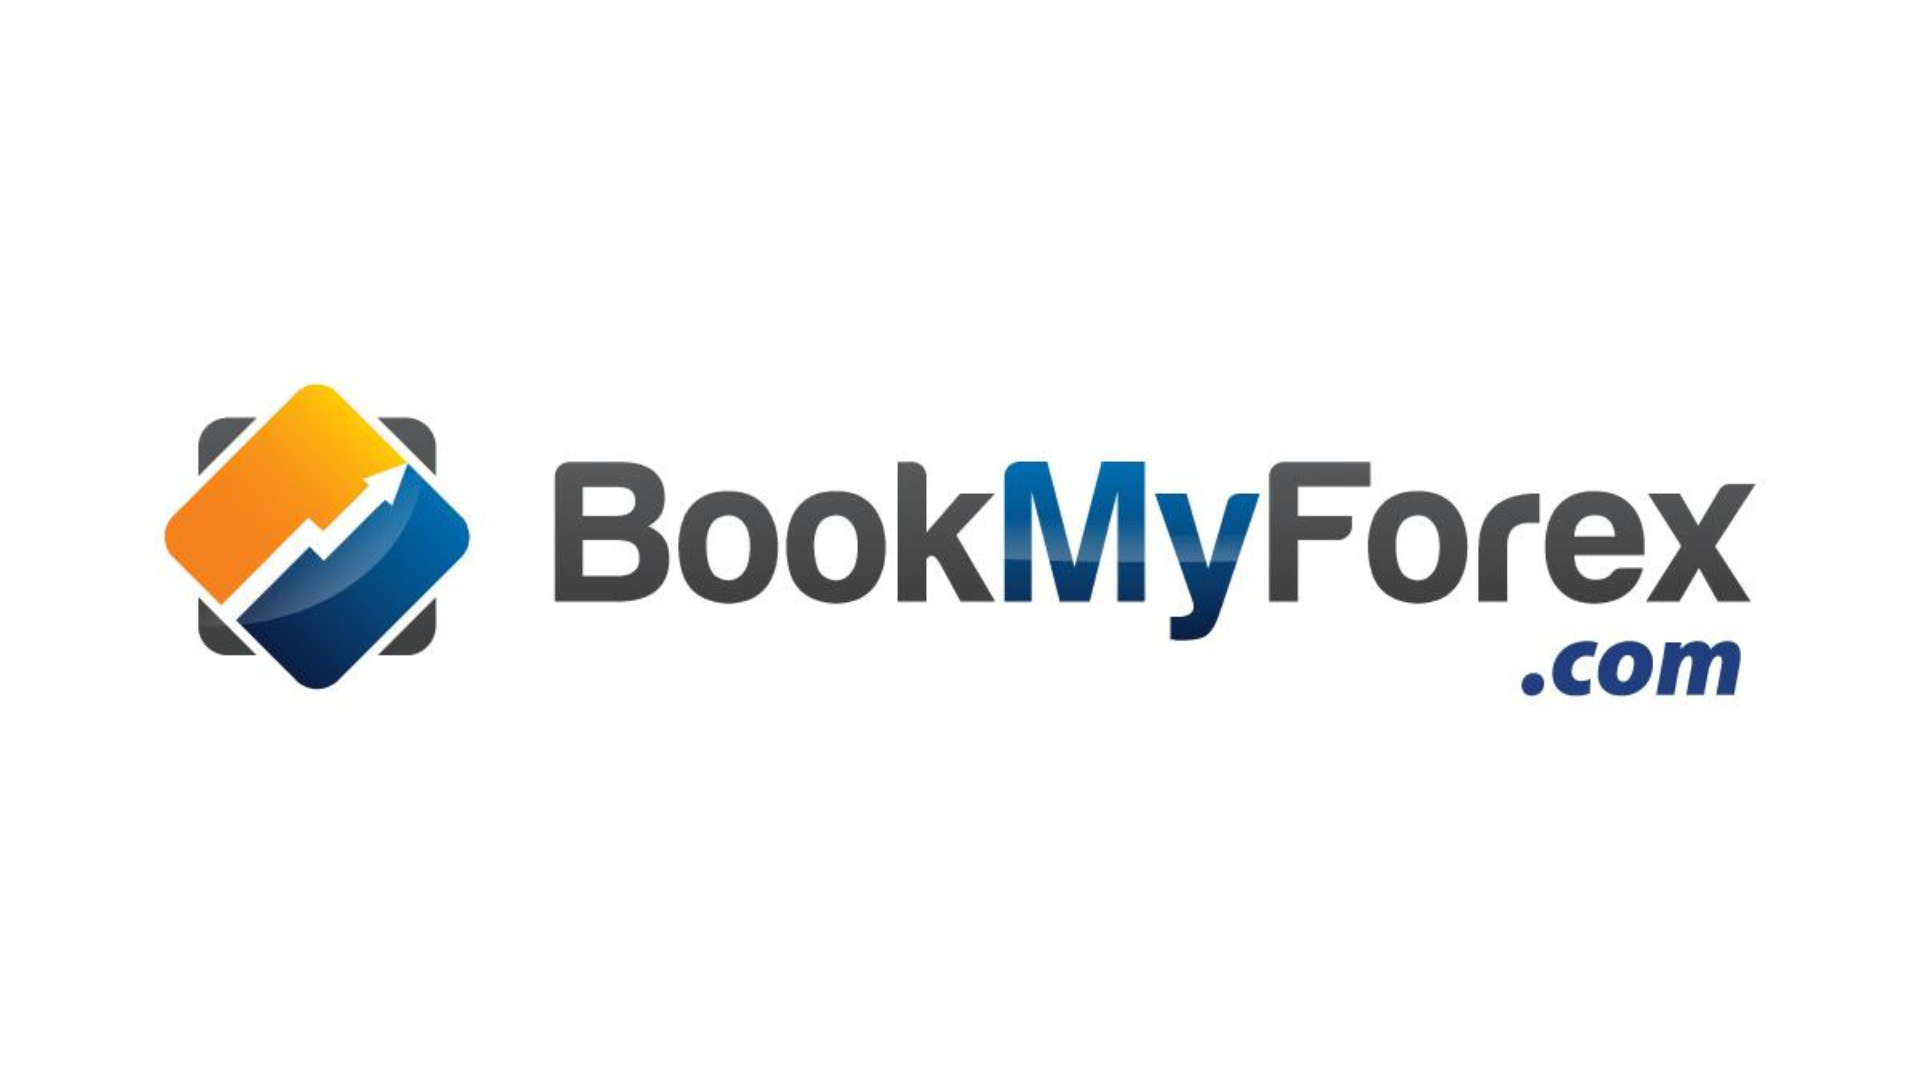 BookMyForex launched Real-Time Forex Card Reloads in New App